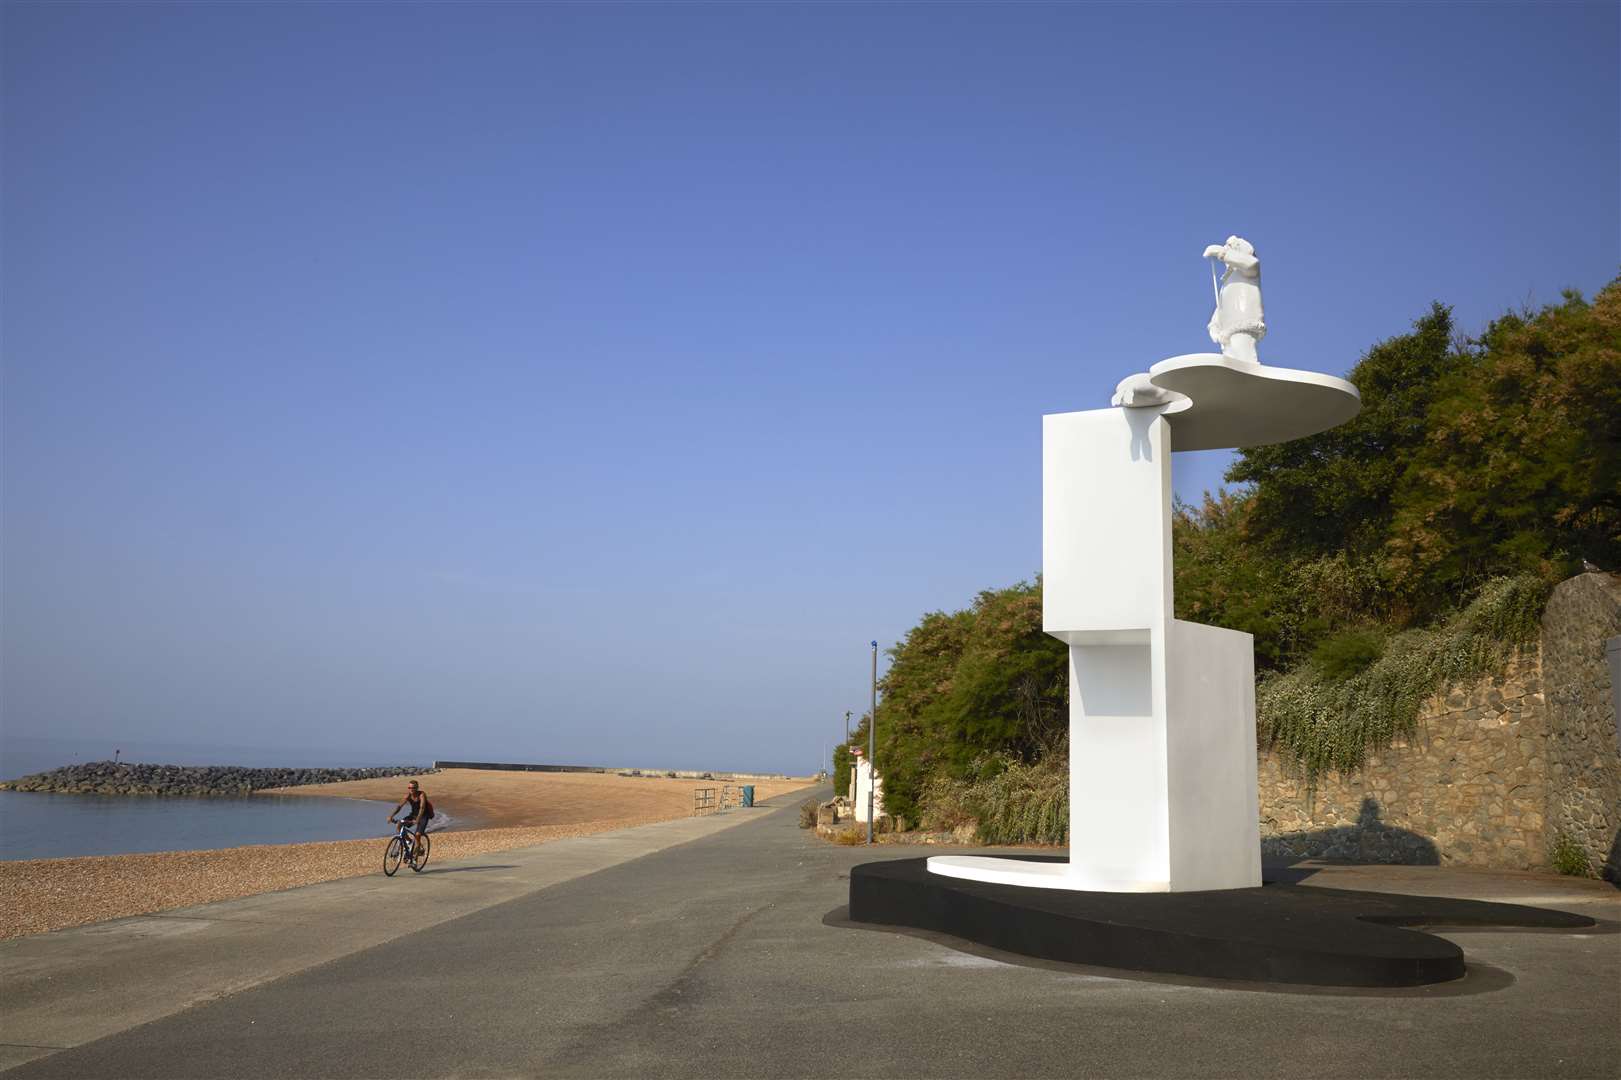 The Ledge by Bill Woodrow is part of the Folkestone Artworks